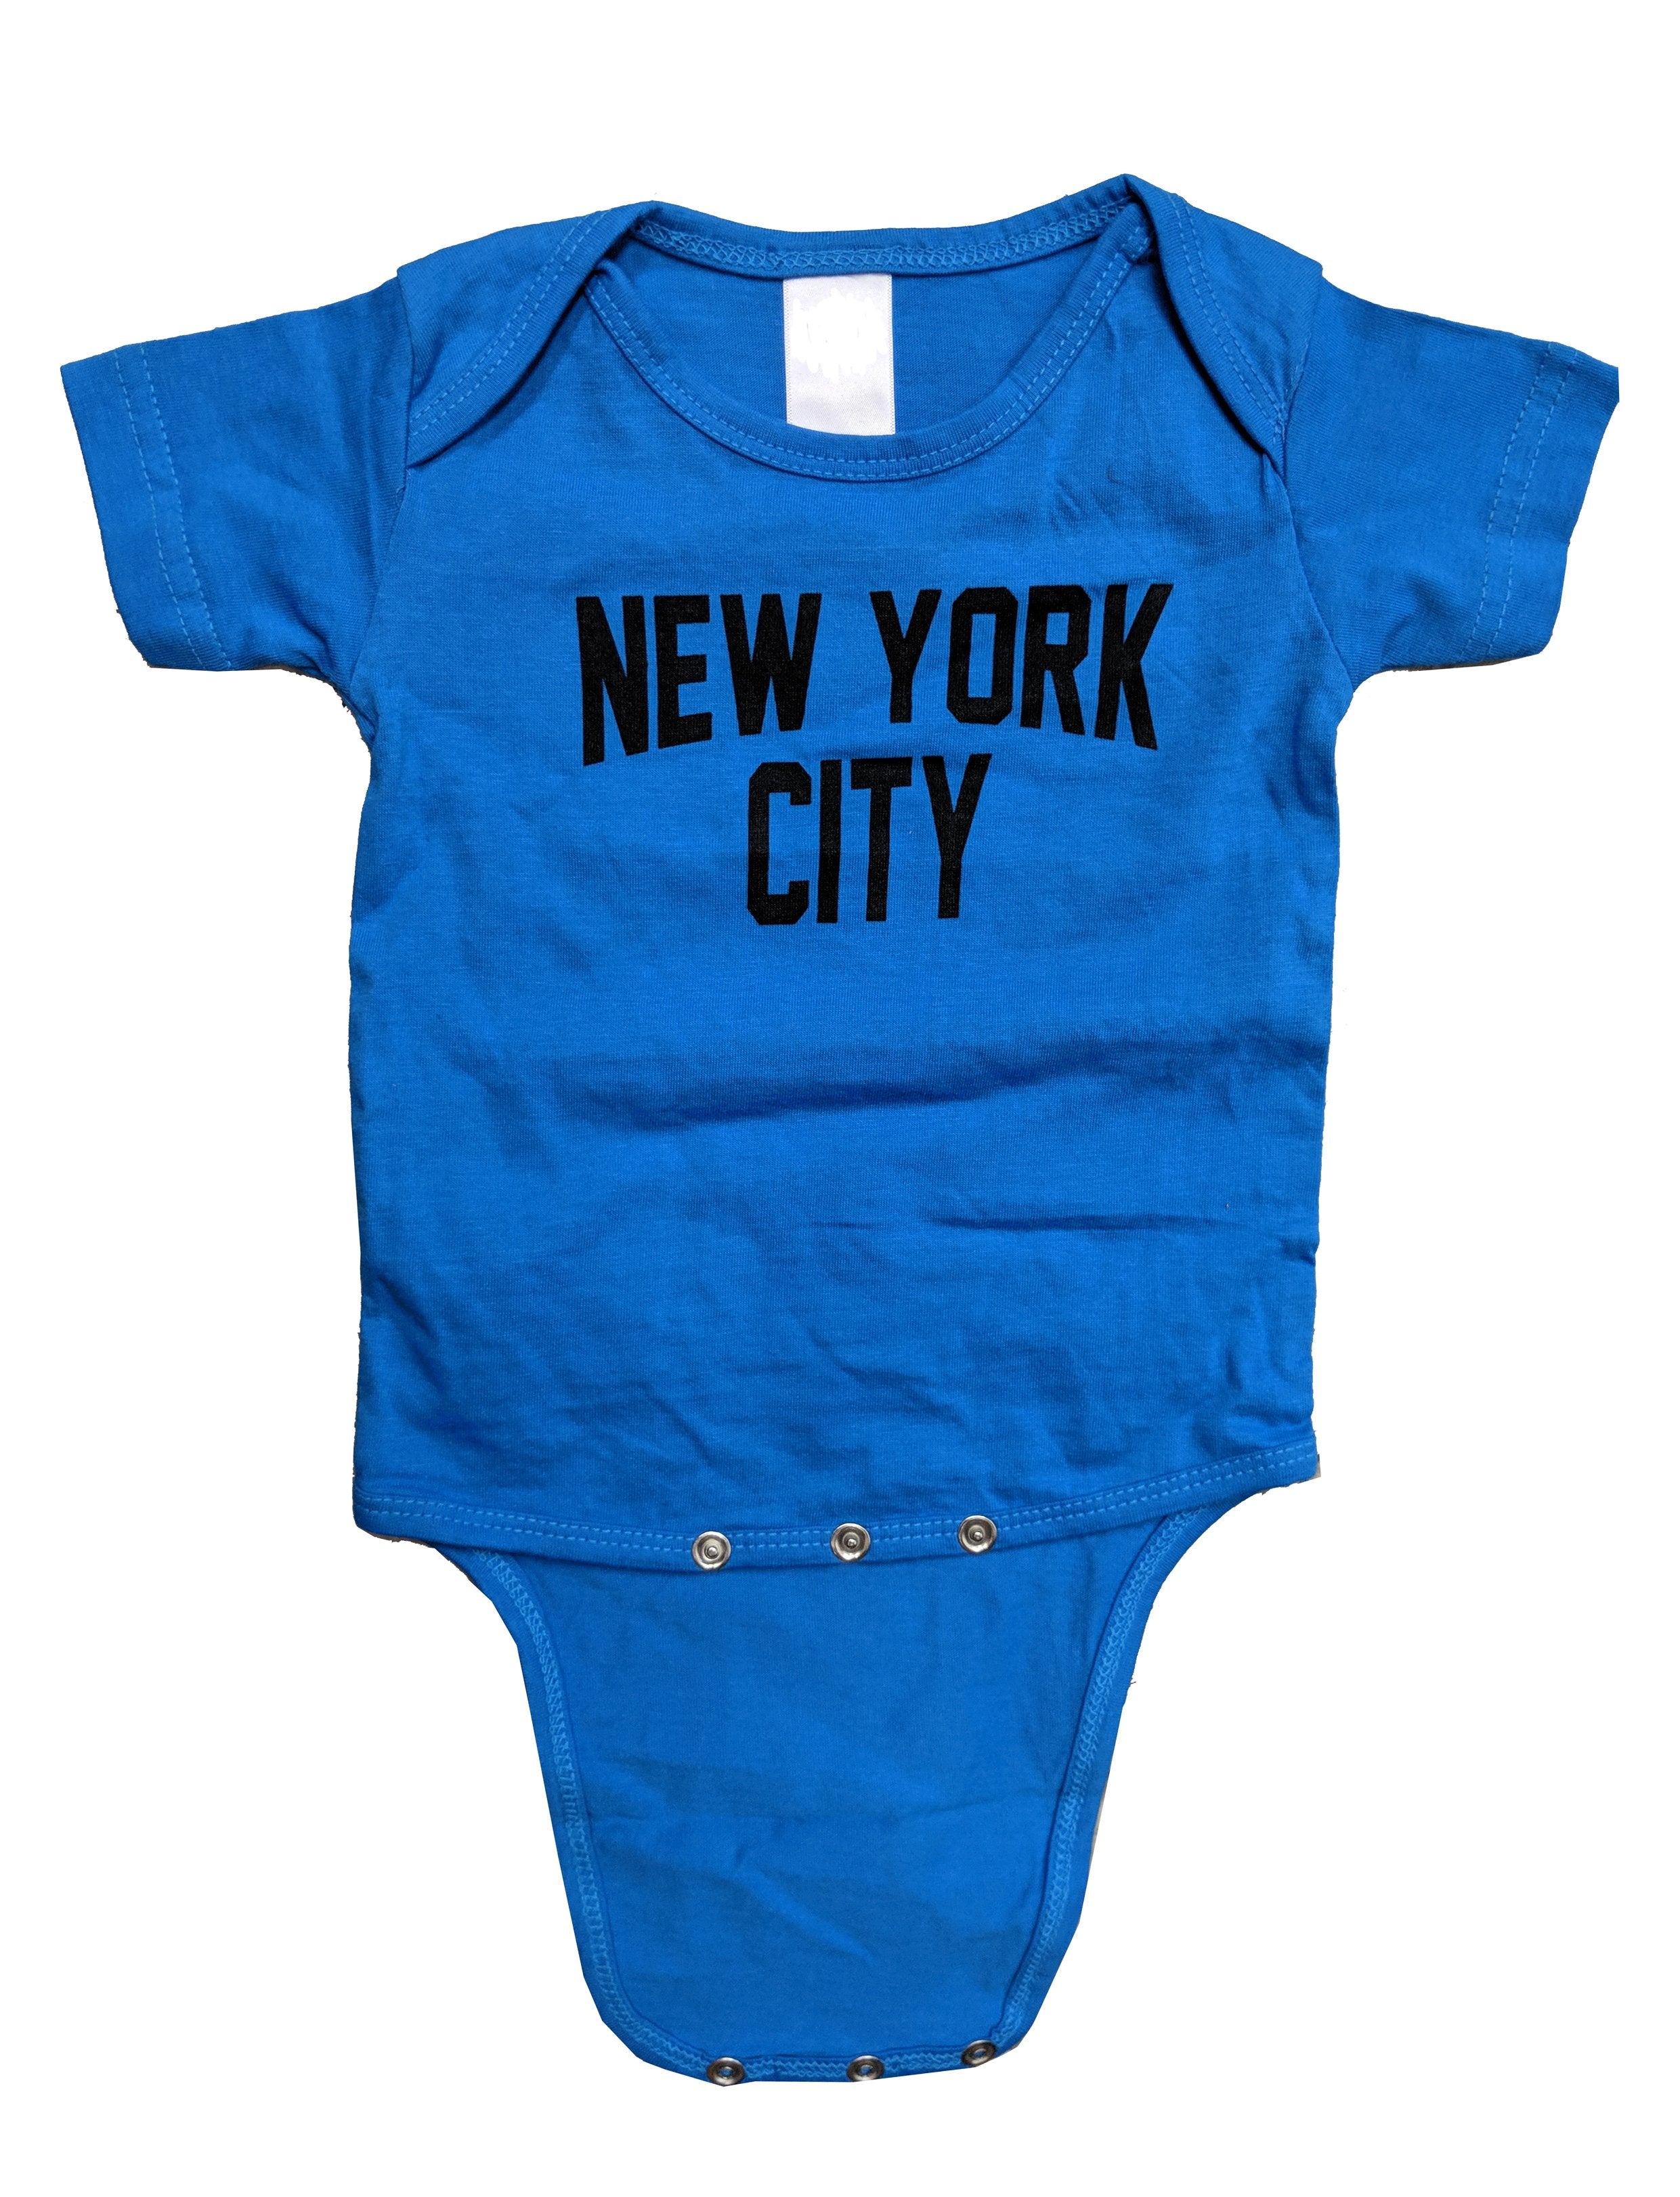 New York City Baby Bodysuit Screen Printed Soft Cotton Snapsuit